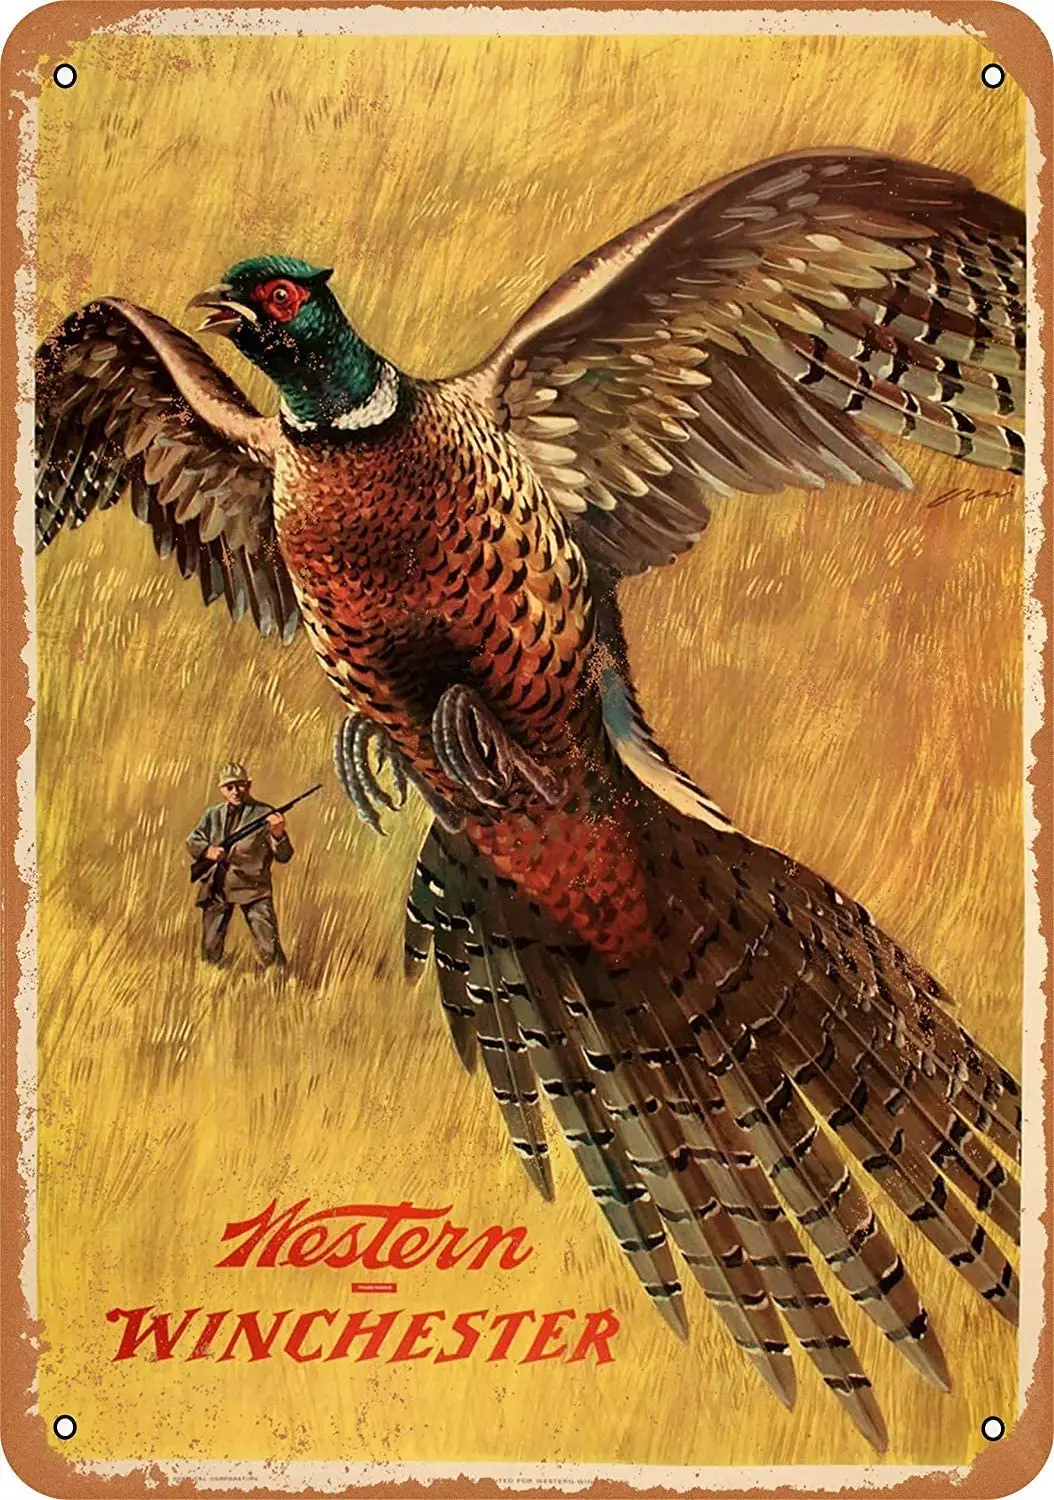 

8 x 12 Tin Metal Sign - Vintage Look 1958 Western Winchester Pheasant Bar Cafe Home Wall Art Deco